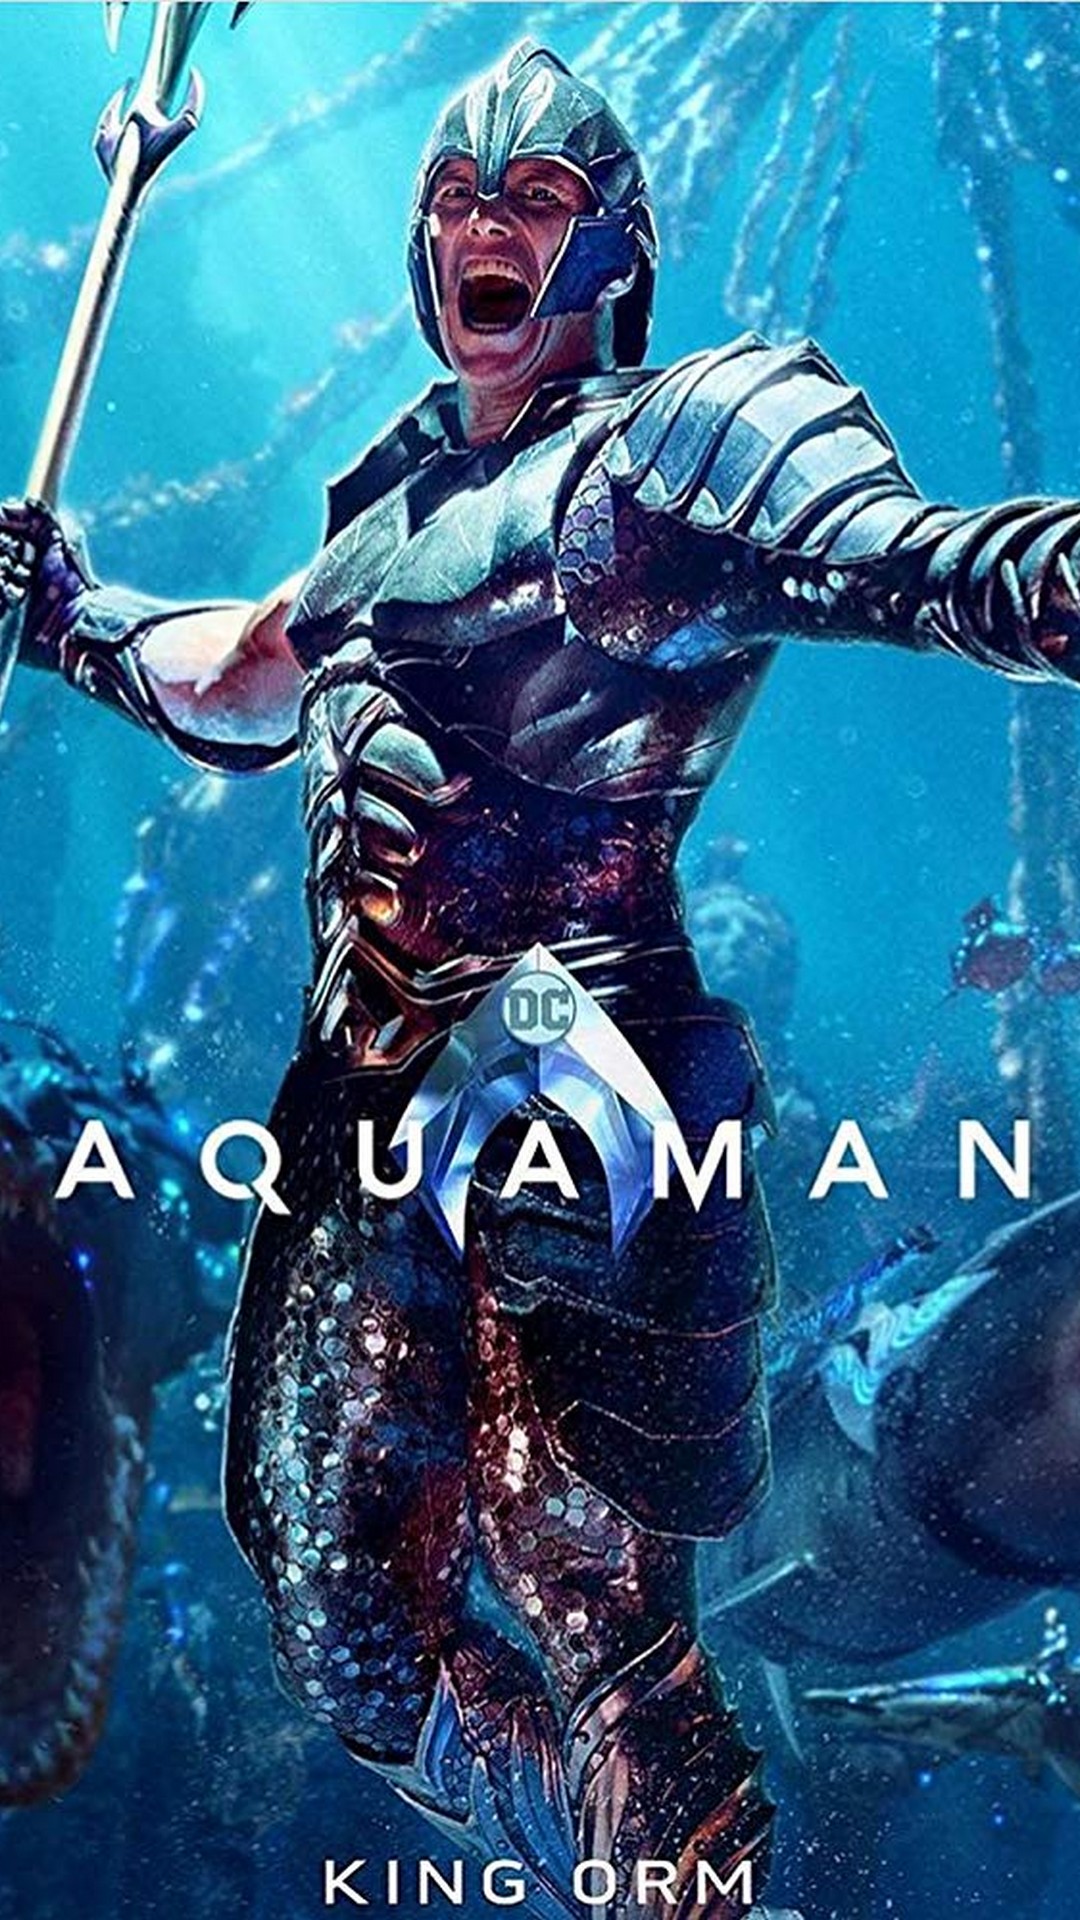 Wallpaper Android Aquaman 2018 with image resolution 1080x1920 pixel. You can make this wallpaper for your Android backgrounds, Tablet, Smartphones Screensavers and Mobile Phone Lock Screen